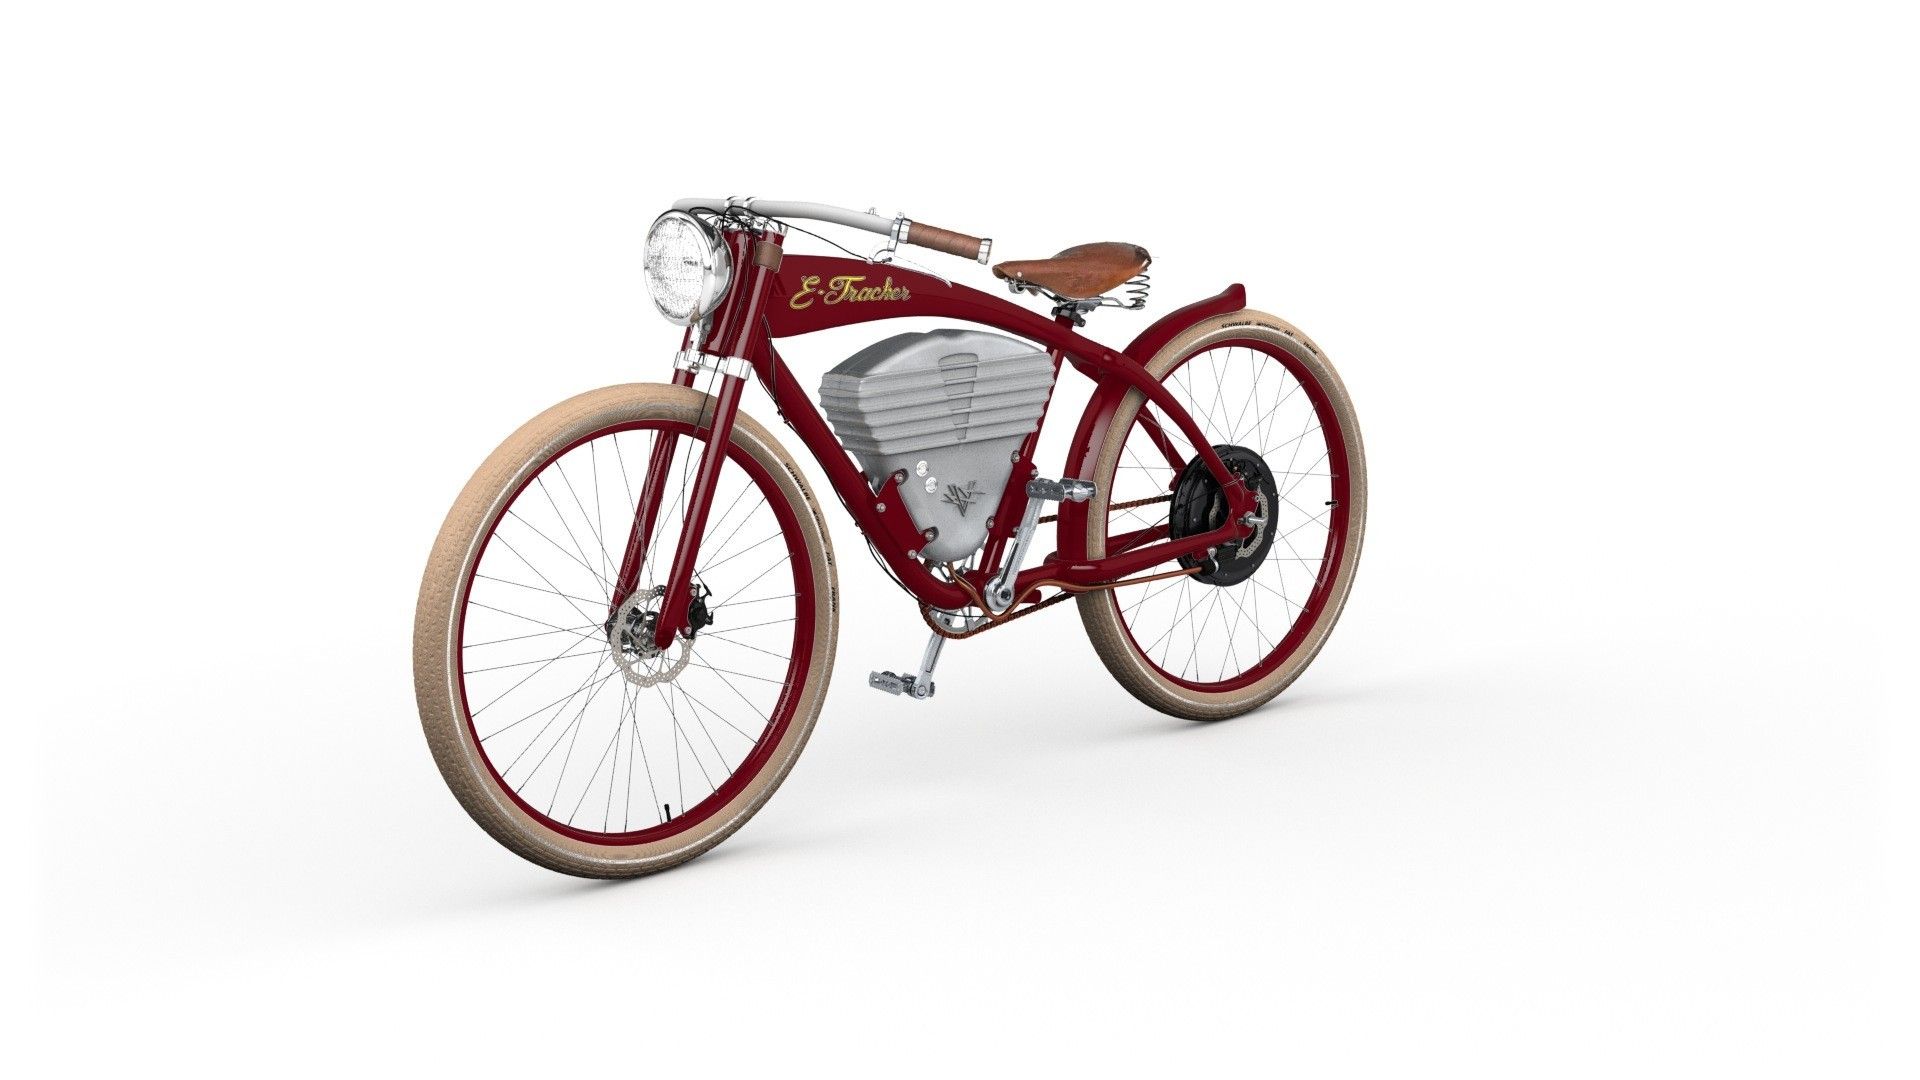 Red 2015 Vintage Electric E Tracker Electric Bicycle